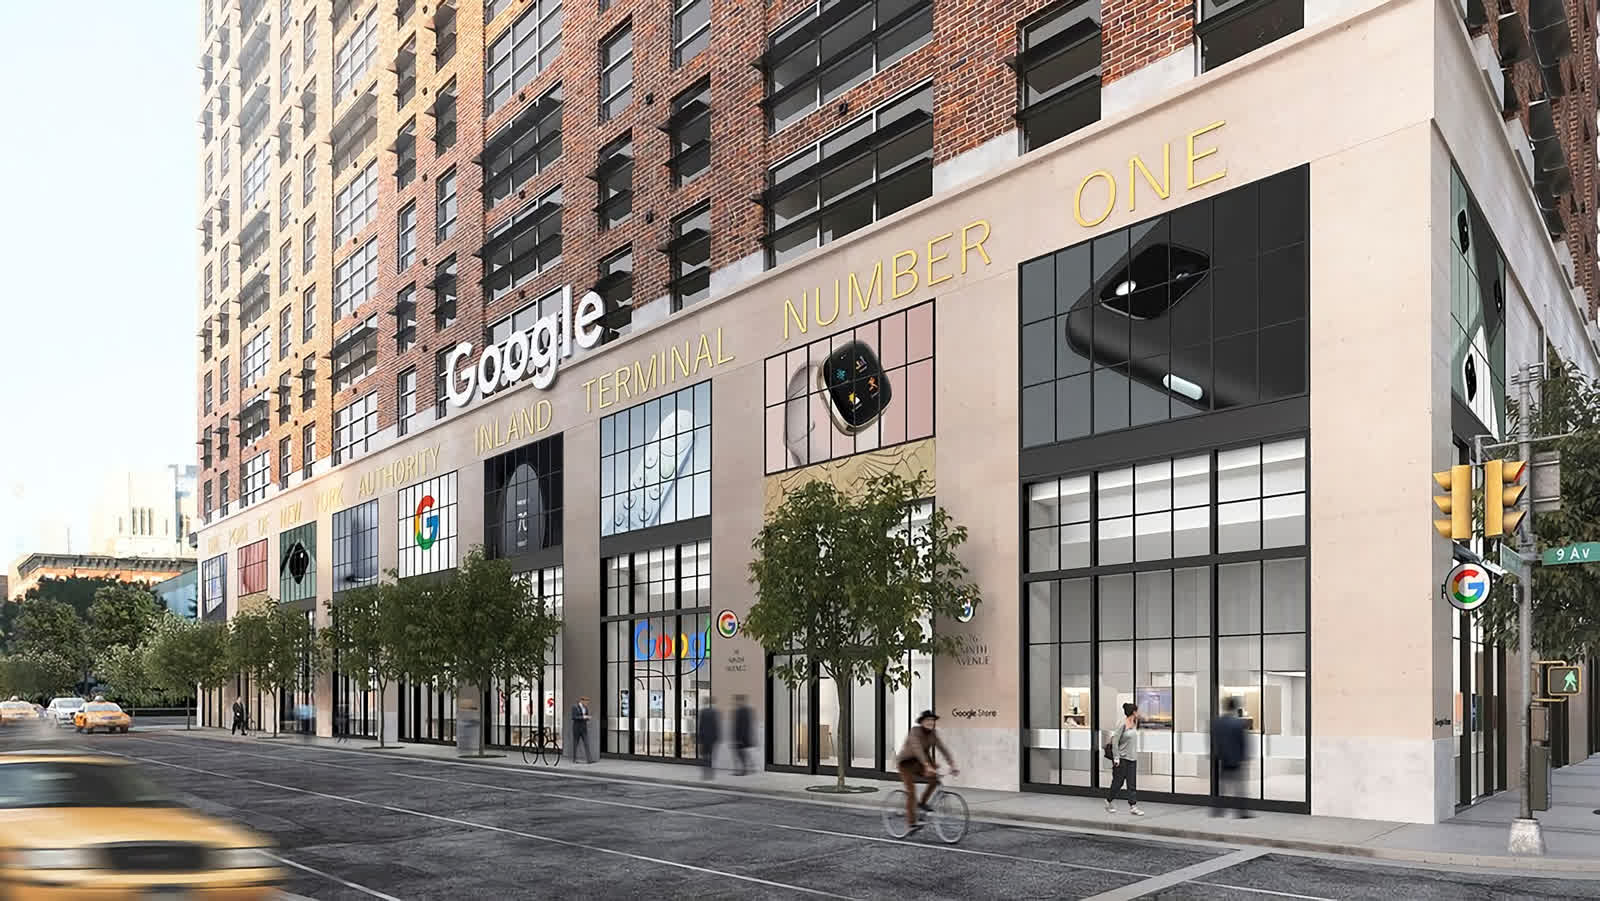 Google is opening its first physical retail store in New York this summer